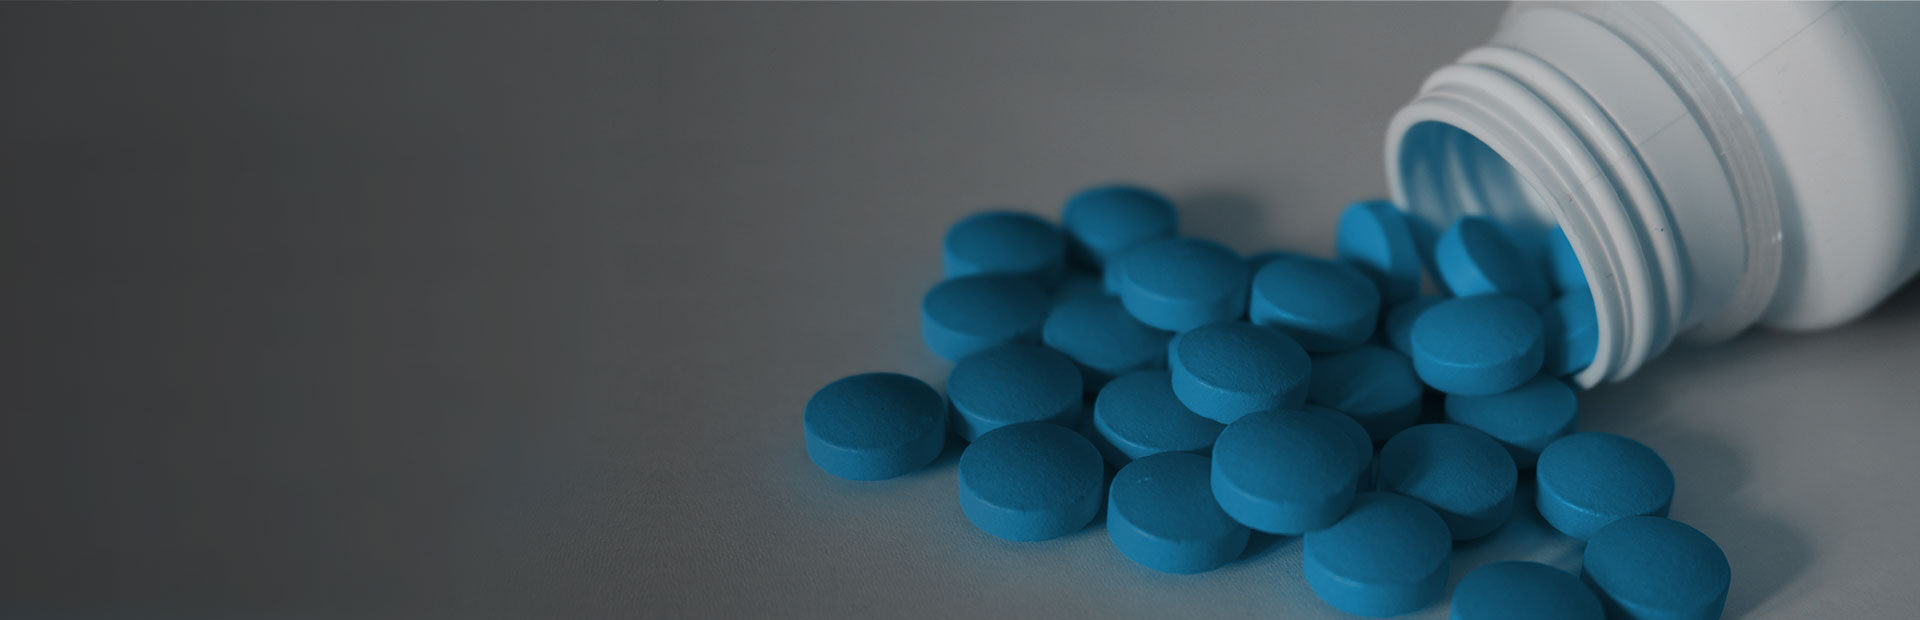 Small blue pills spilling out of a bottle